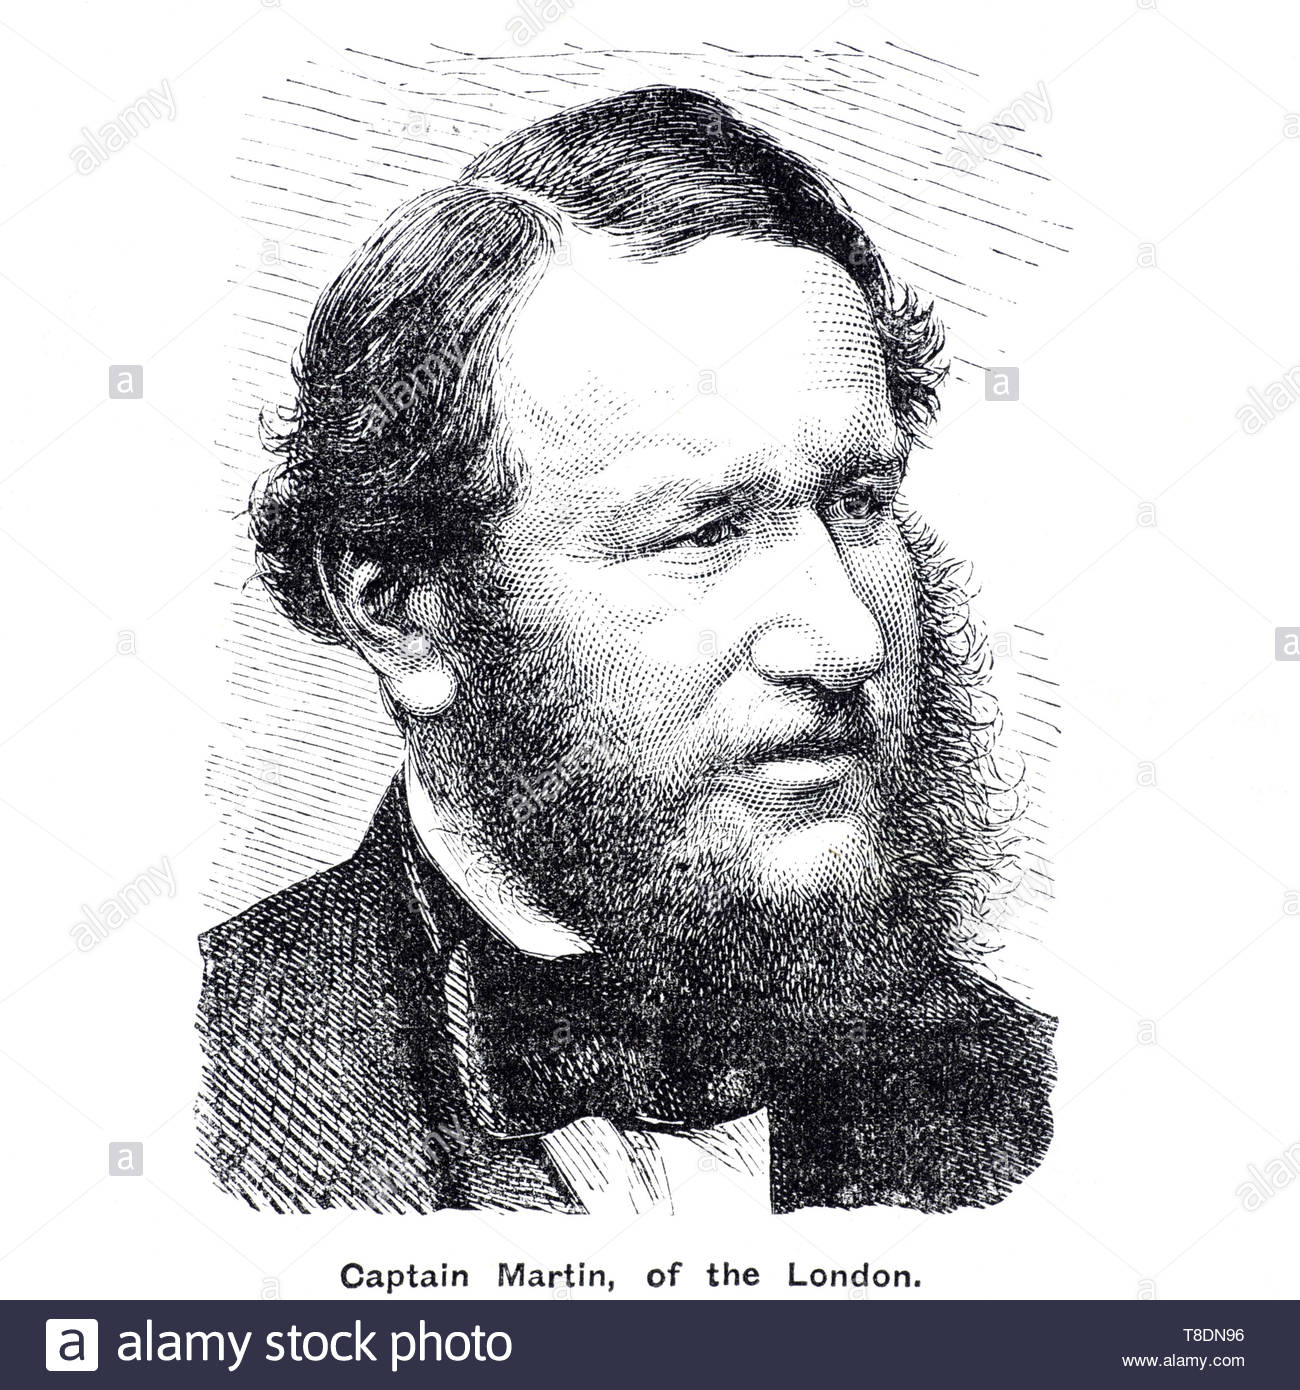 Australian Captain J. B. Martin was in charge of the British cargo Steamship SS London, travelling from Gravesend England to Melbourne Australia, when it sank in the Bay of Biscay on 11 January 1866, antique illustration from 1884 Stock Photo